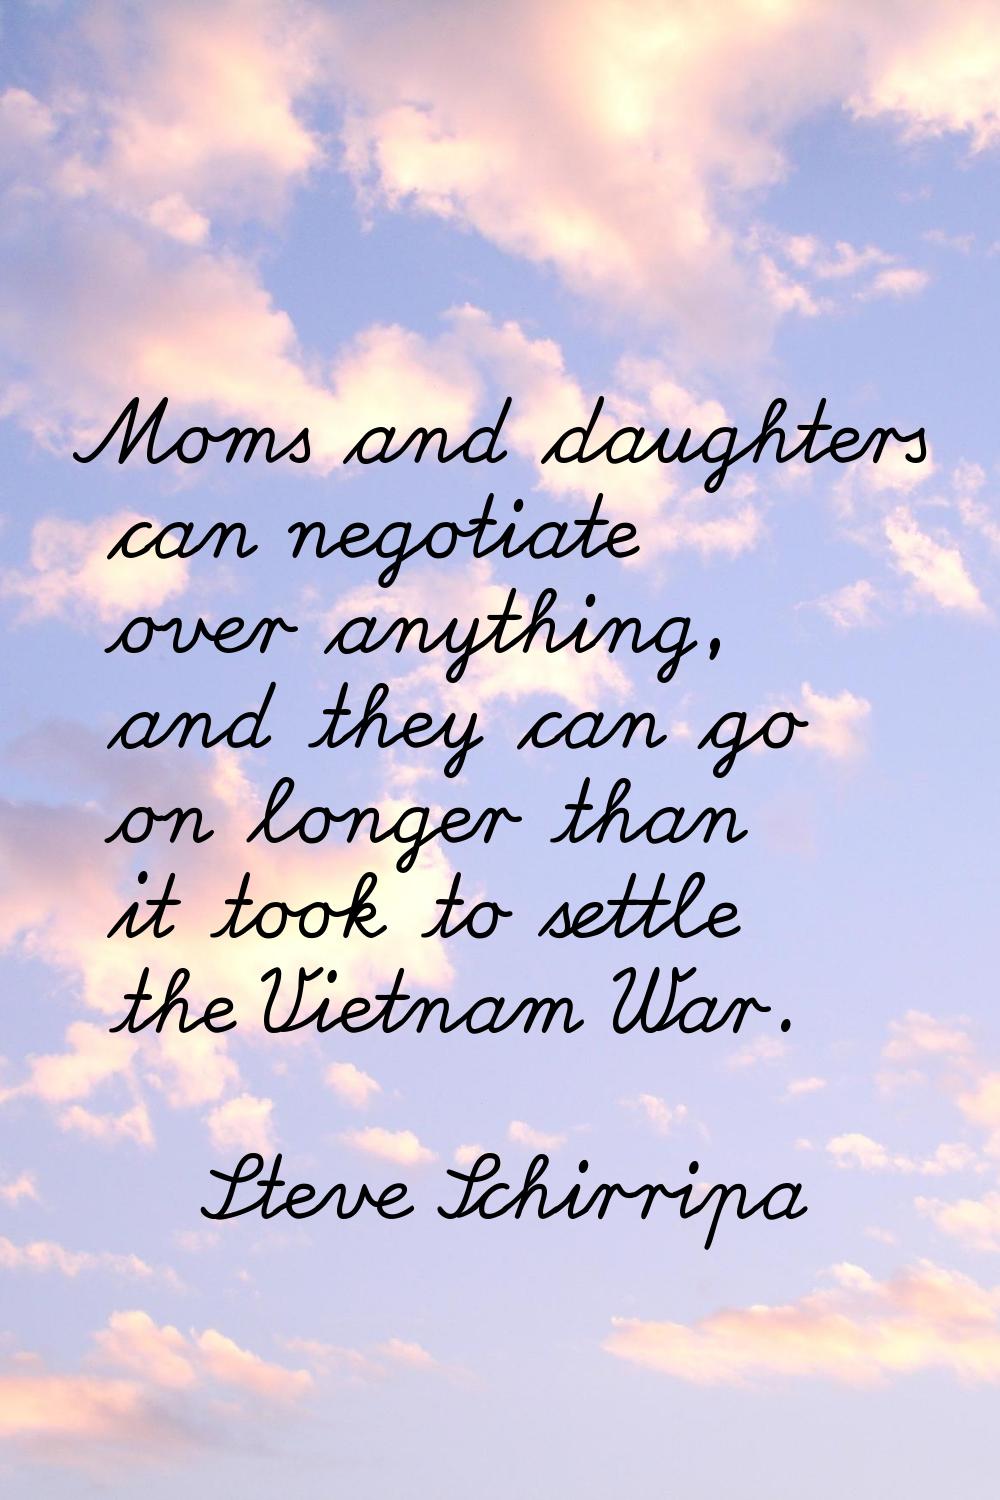 Moms and daughters can negotiate over anything, and they can go on longer than it took to settle th